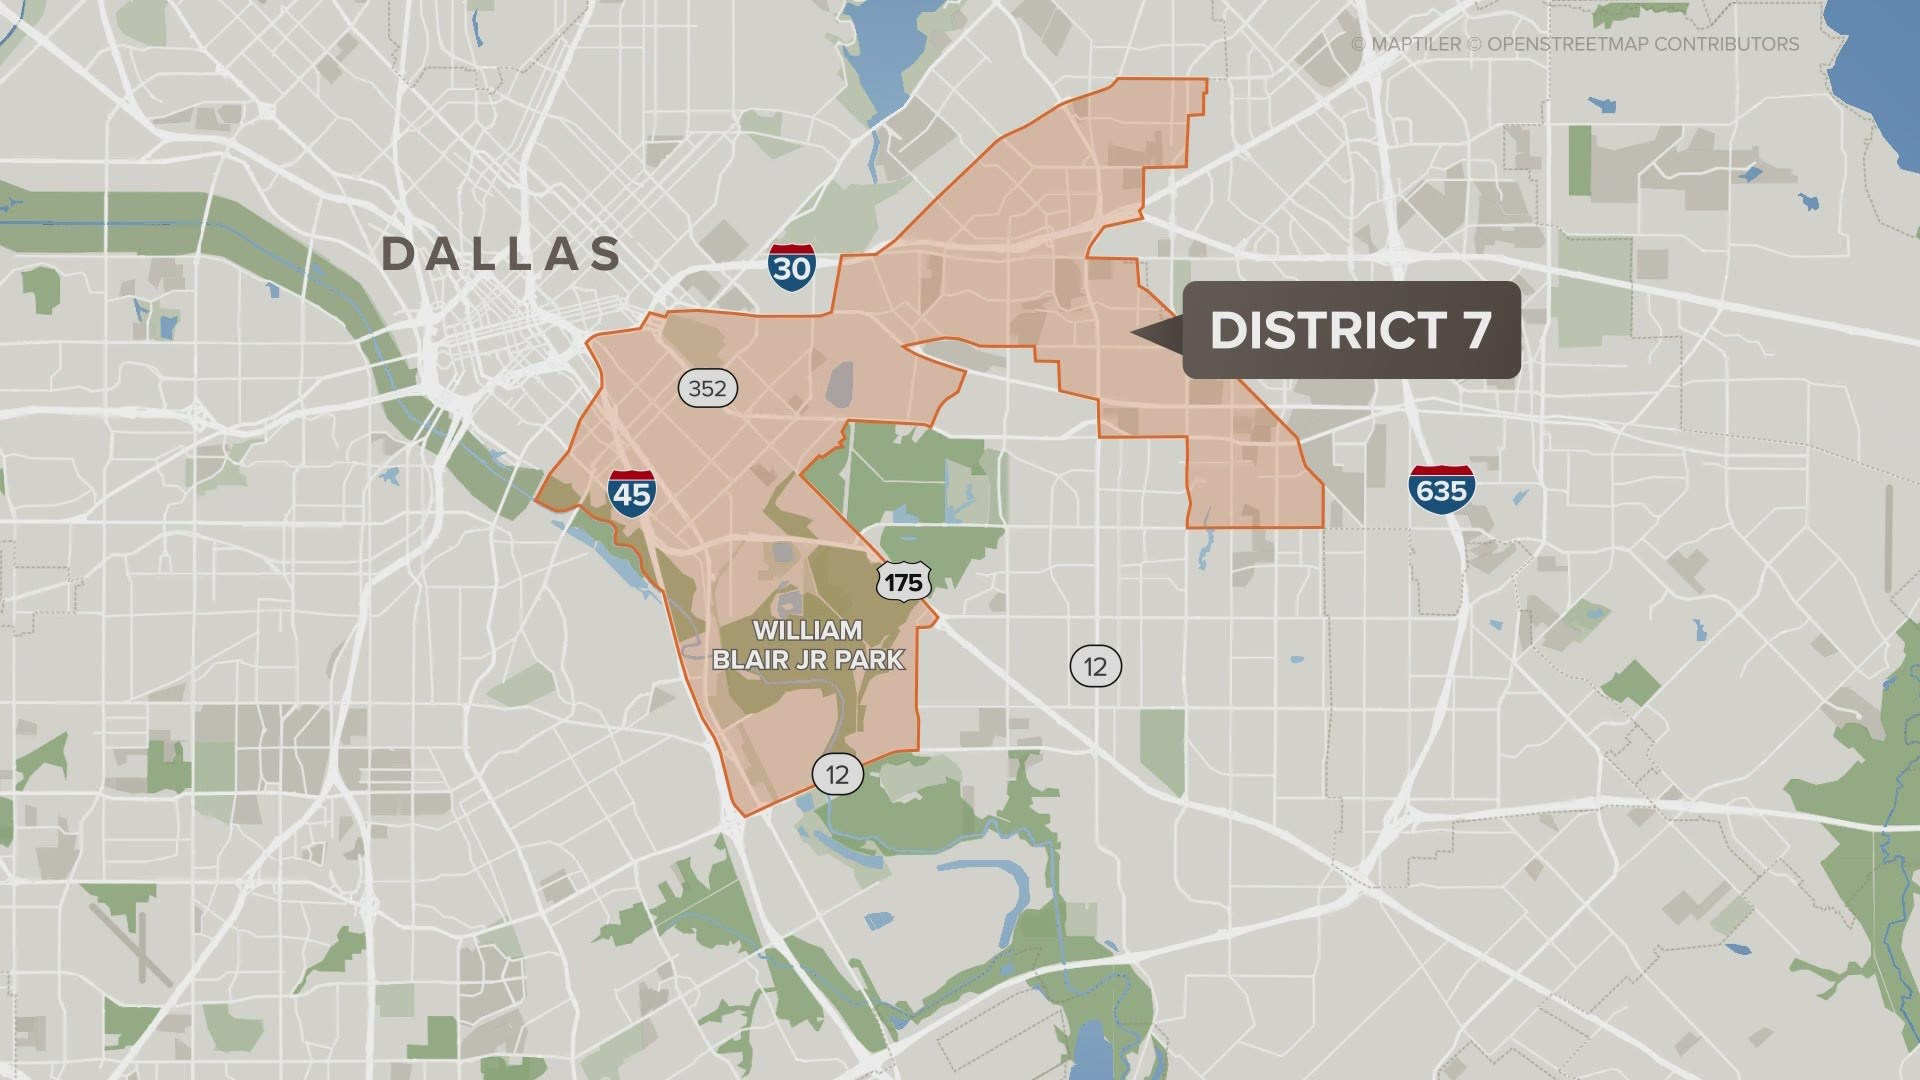 Some of those issues were reported in District 7, home to a hotly contested race for Dallas City Council.